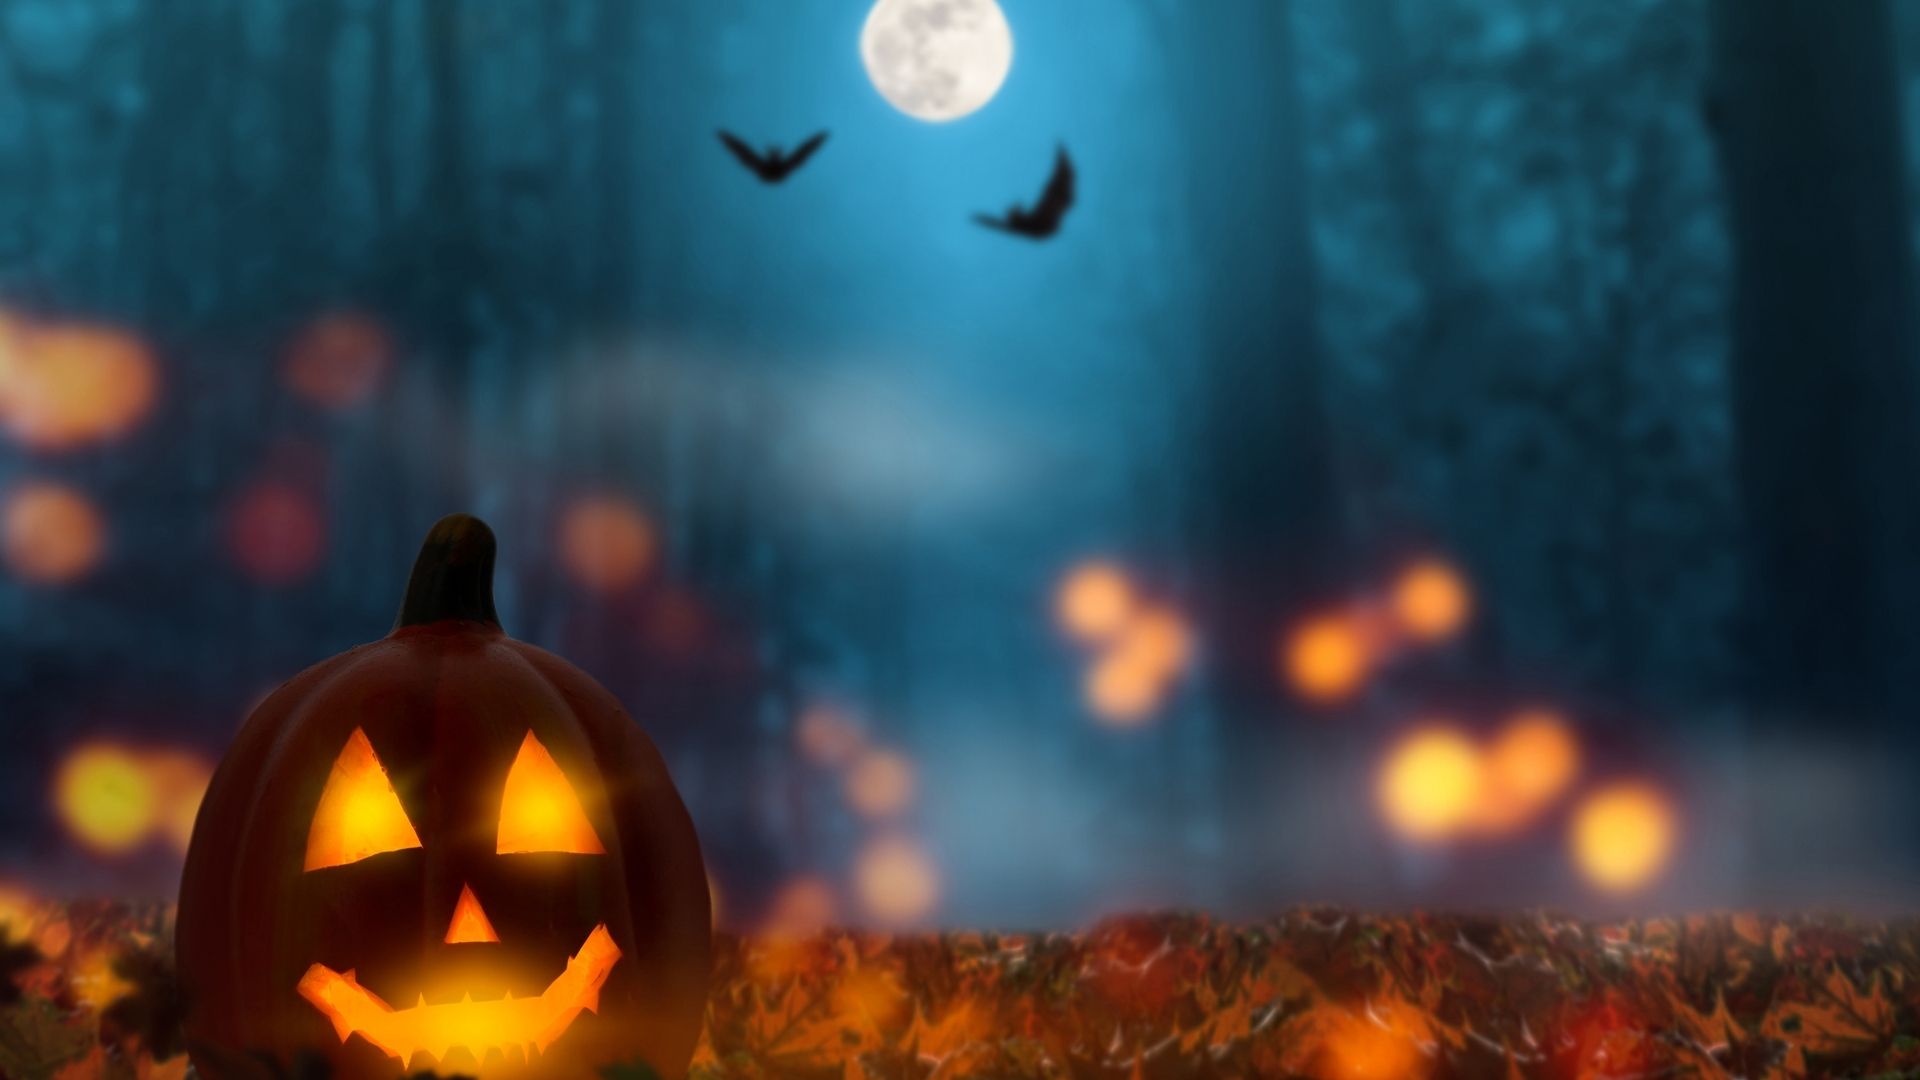 Knowledge Plus Episode 05 What Is Halloween